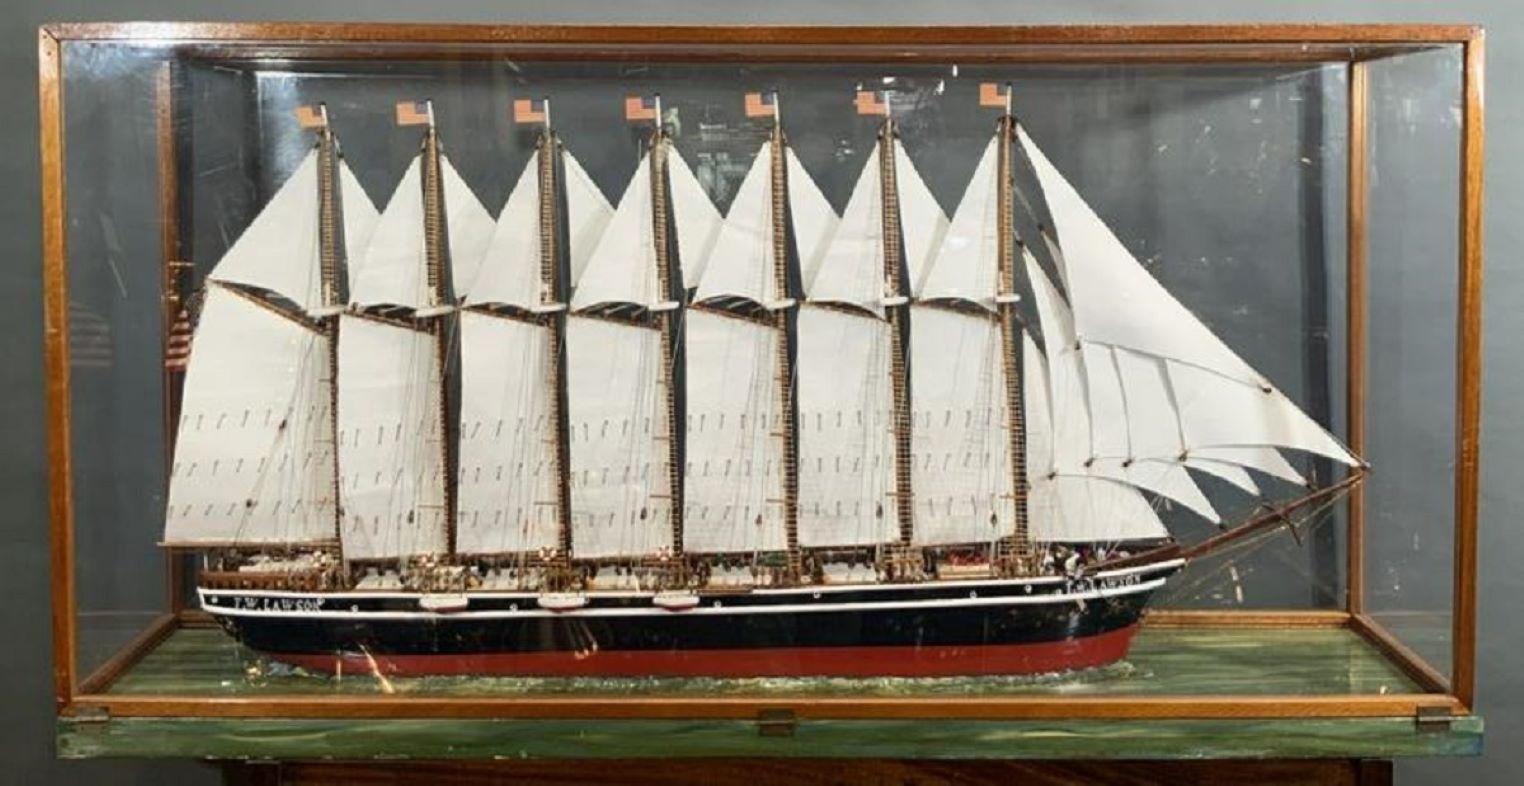 Cased model of the famous Quincy Mass built seven masted schooner Thomas W Lawson. Detailed with crew on deck and a full suit of sails. Fitted to a custom case.

Overall Dimensions: 54